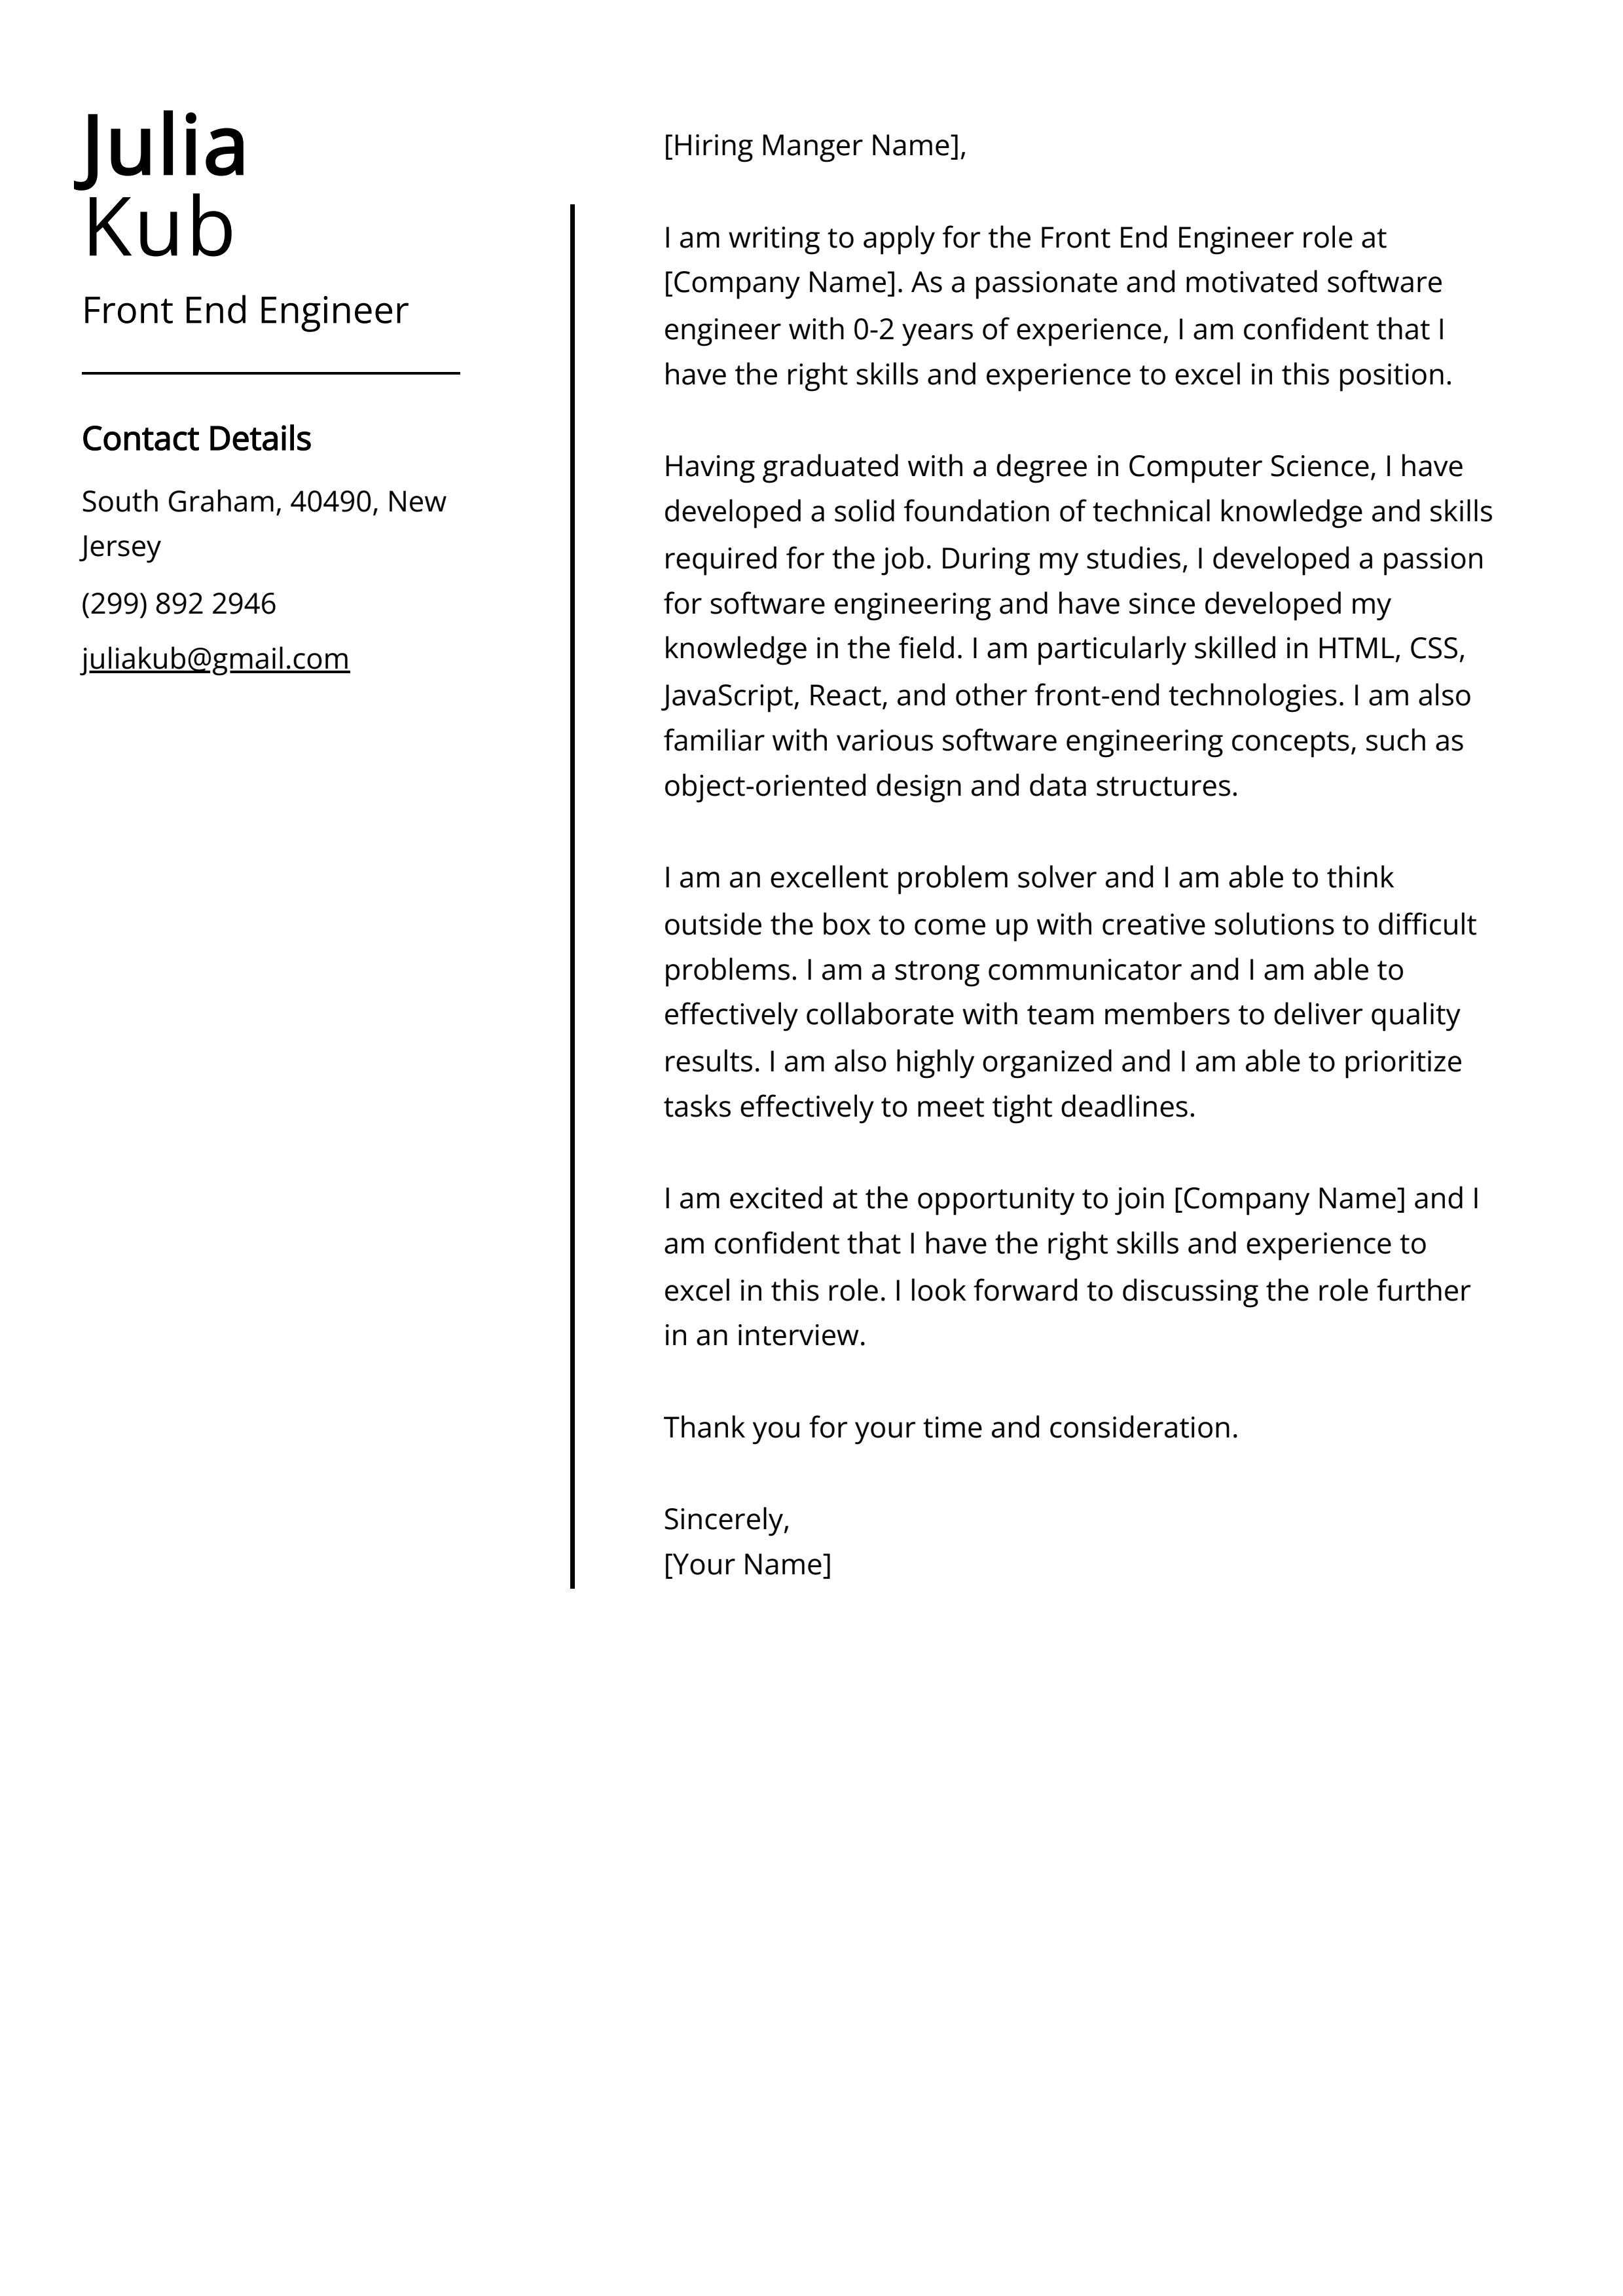 Front End Engineer Cover Letter Example